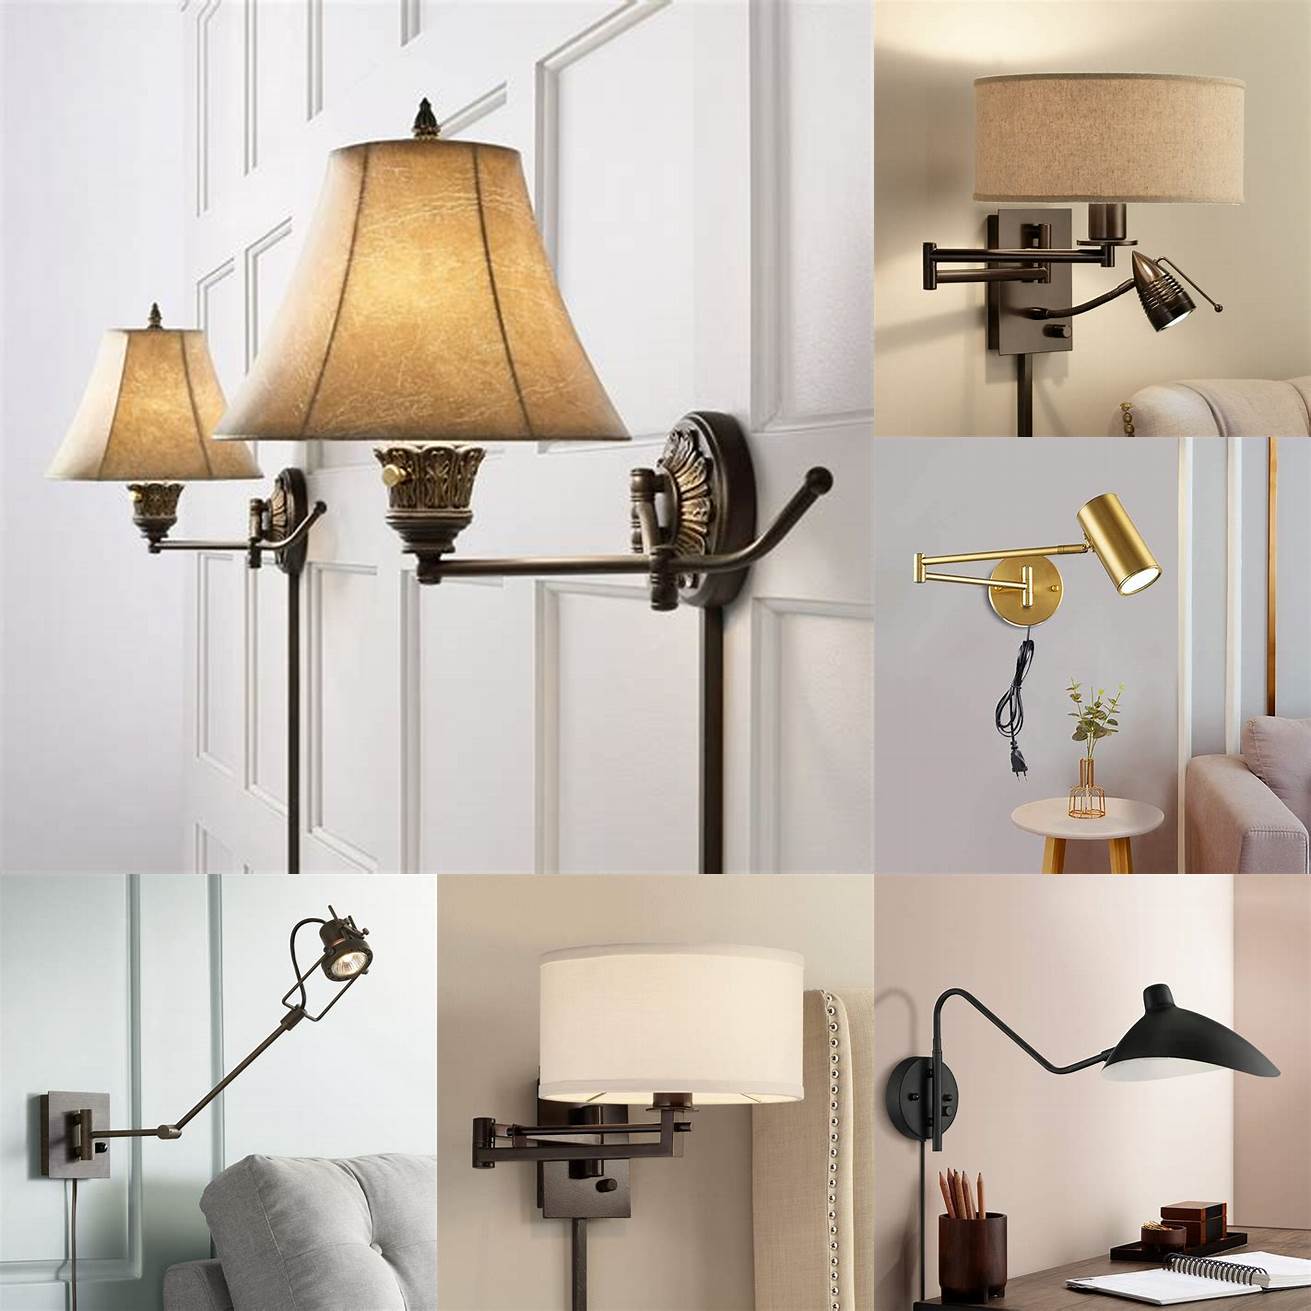 Swing-arm wall lamps for reading in bed